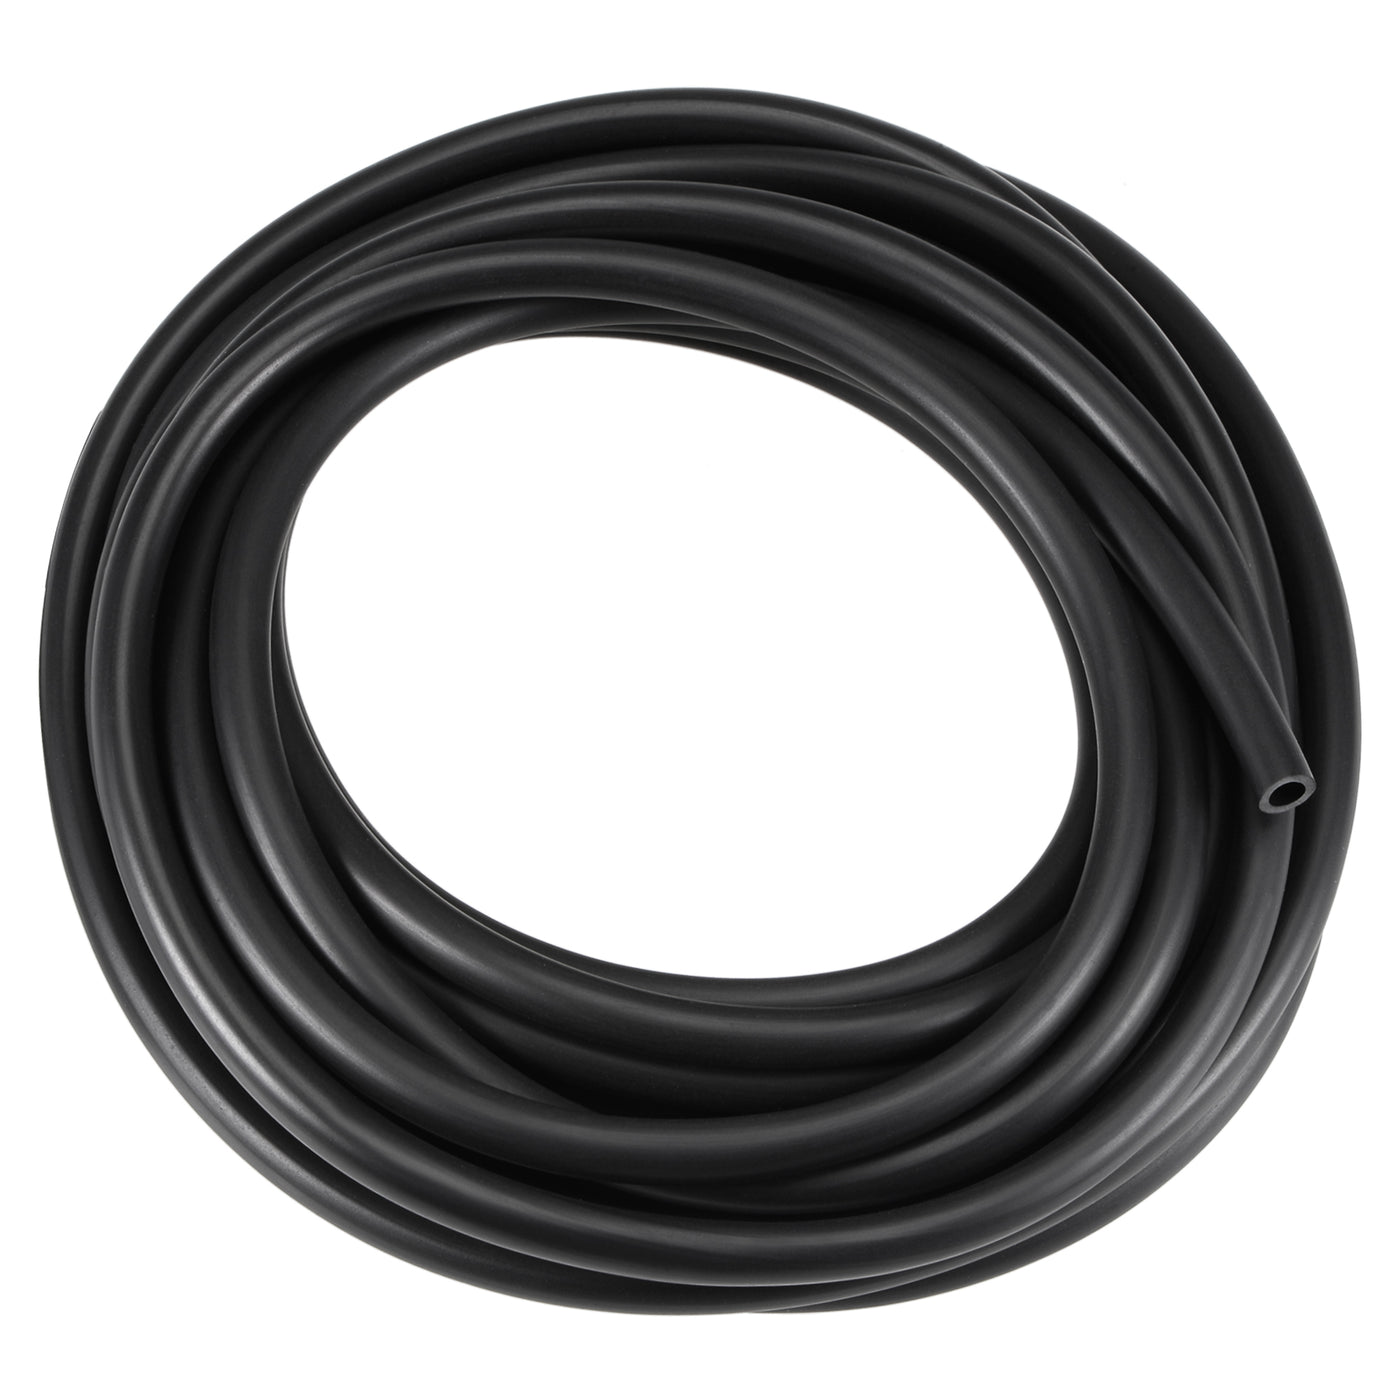 uxcell Uxcell Fuel Line Hose 4mm ID 6mm(1/4-inch) OD 16ft Oil Line & Fuel Pipe Rubber Water Hose Black